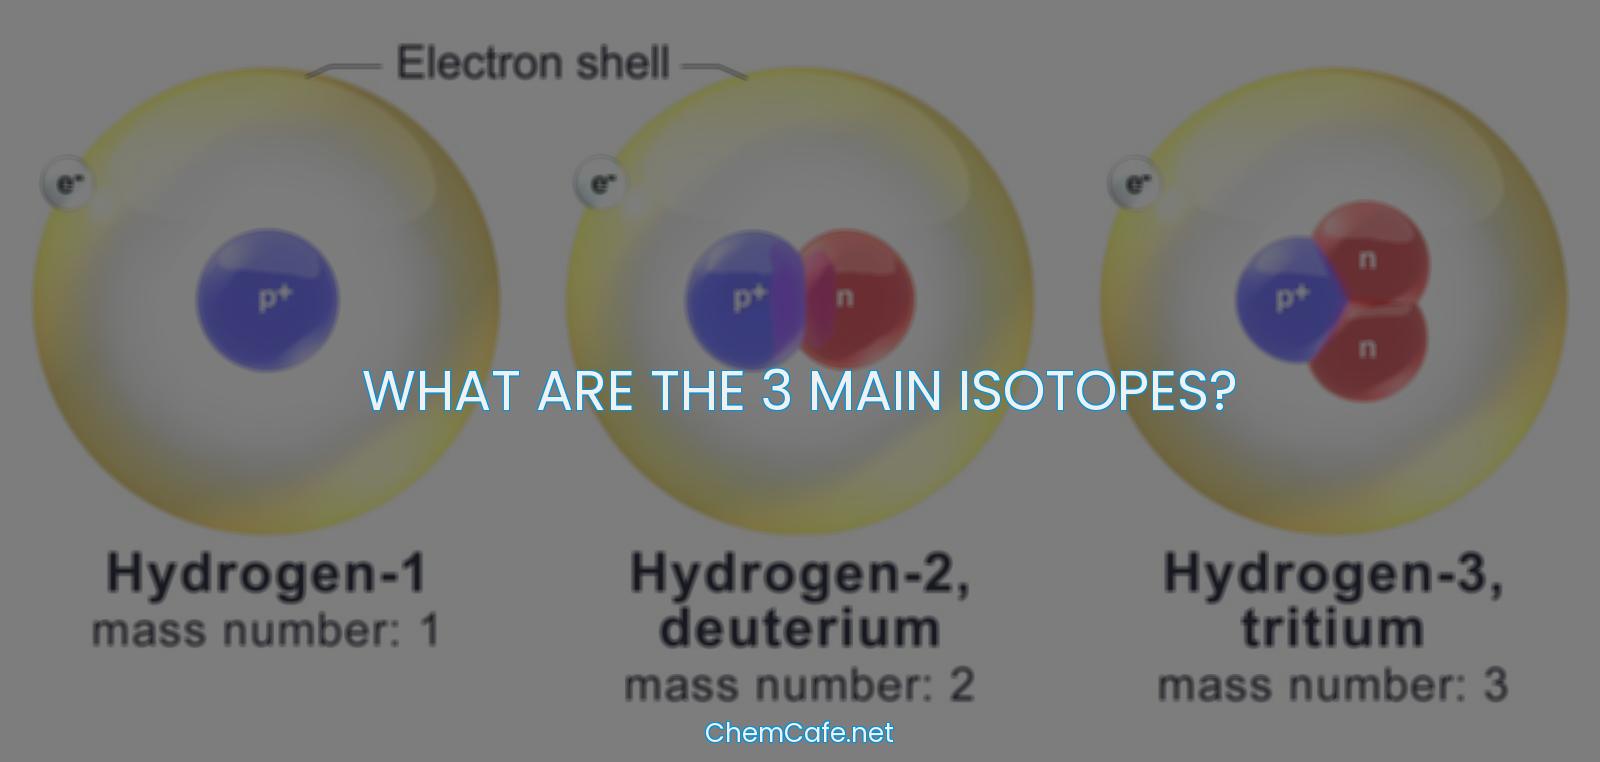 what are the 3 main isotopes?